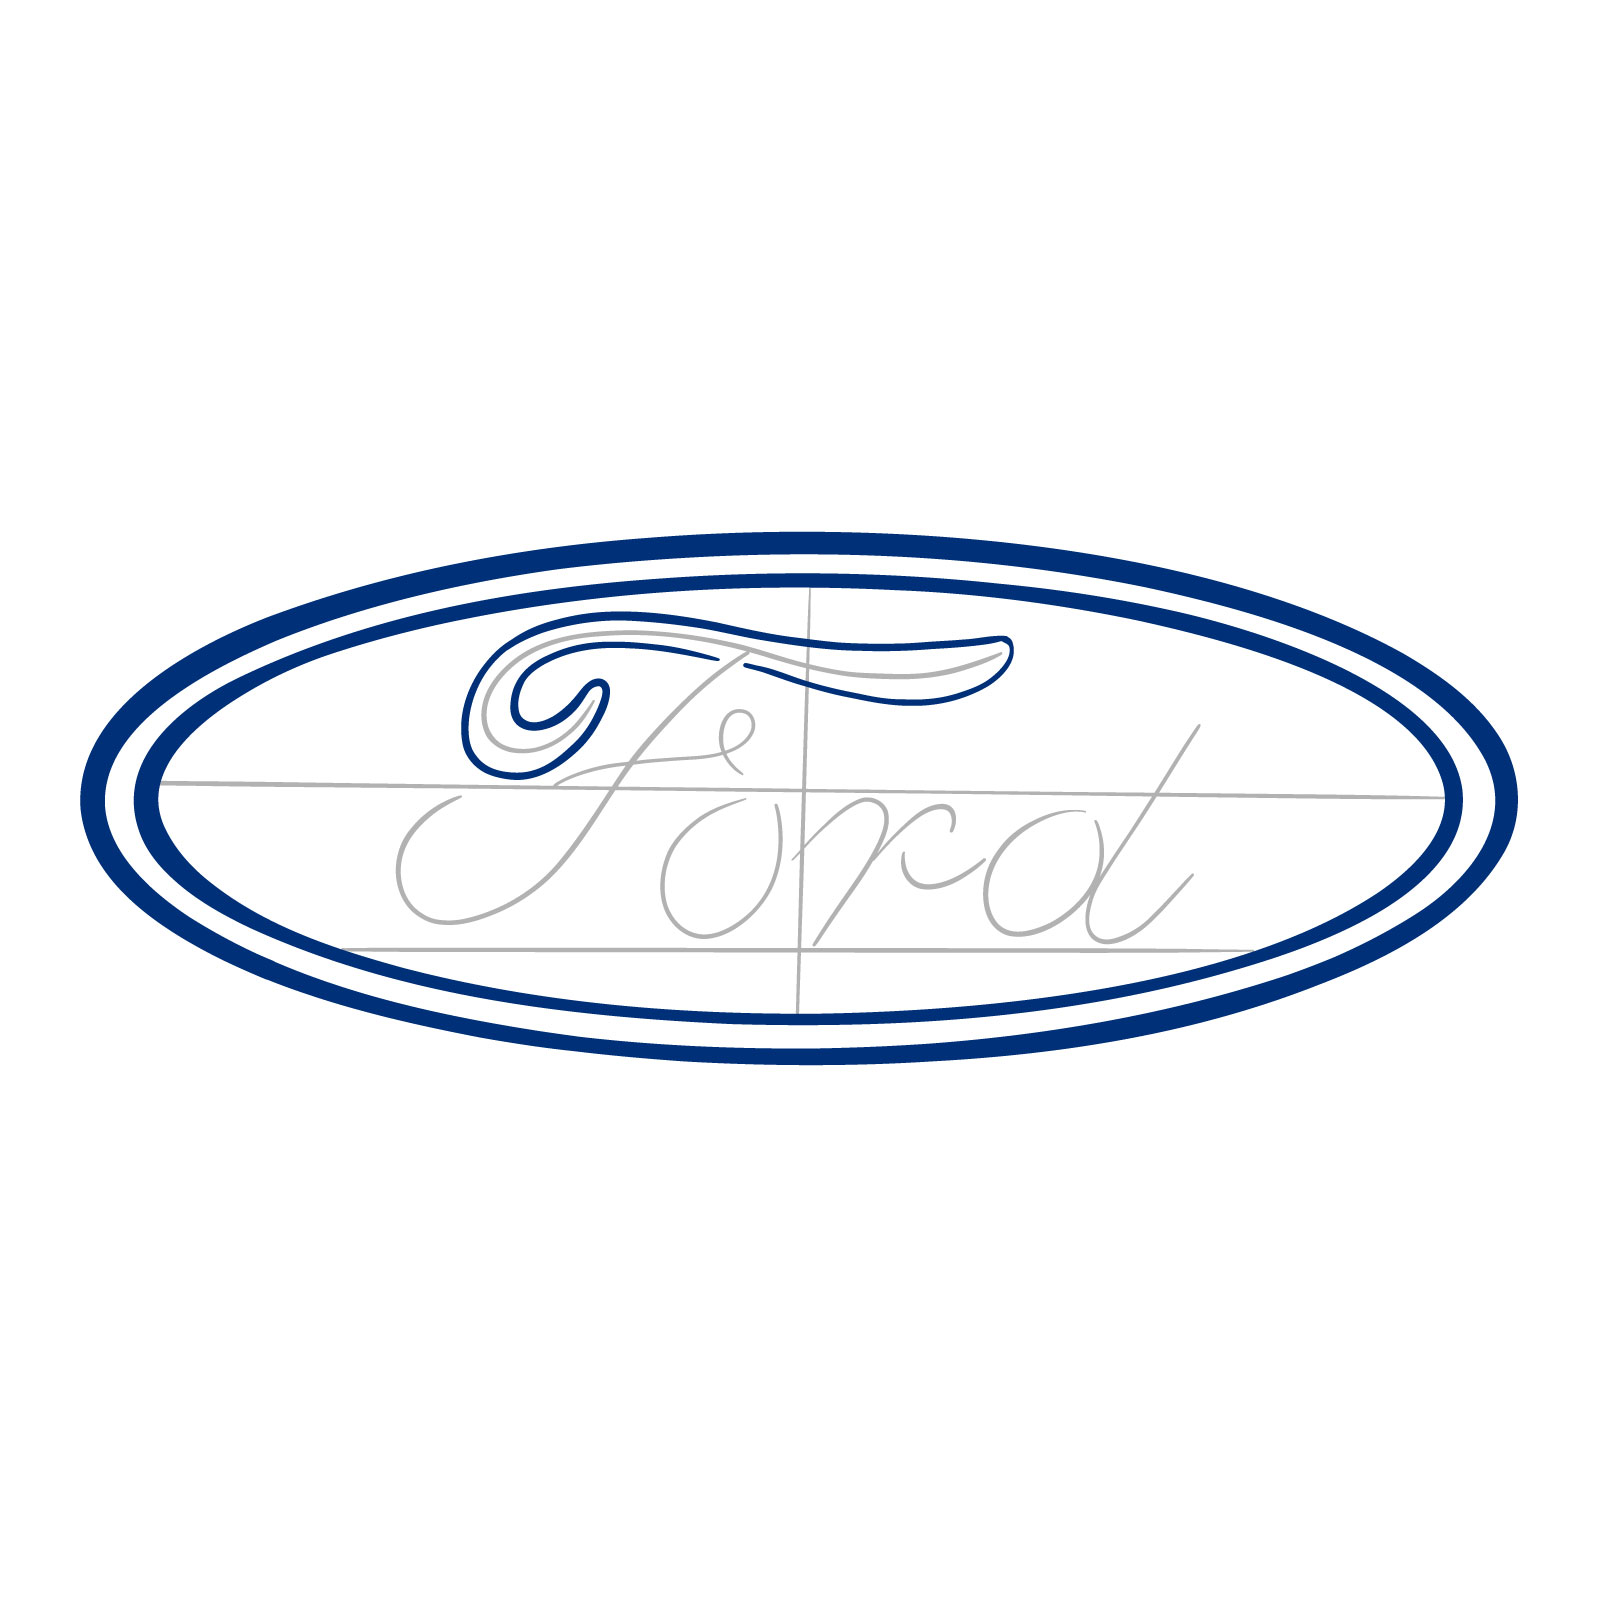 How to draw the Ford logo - step 06